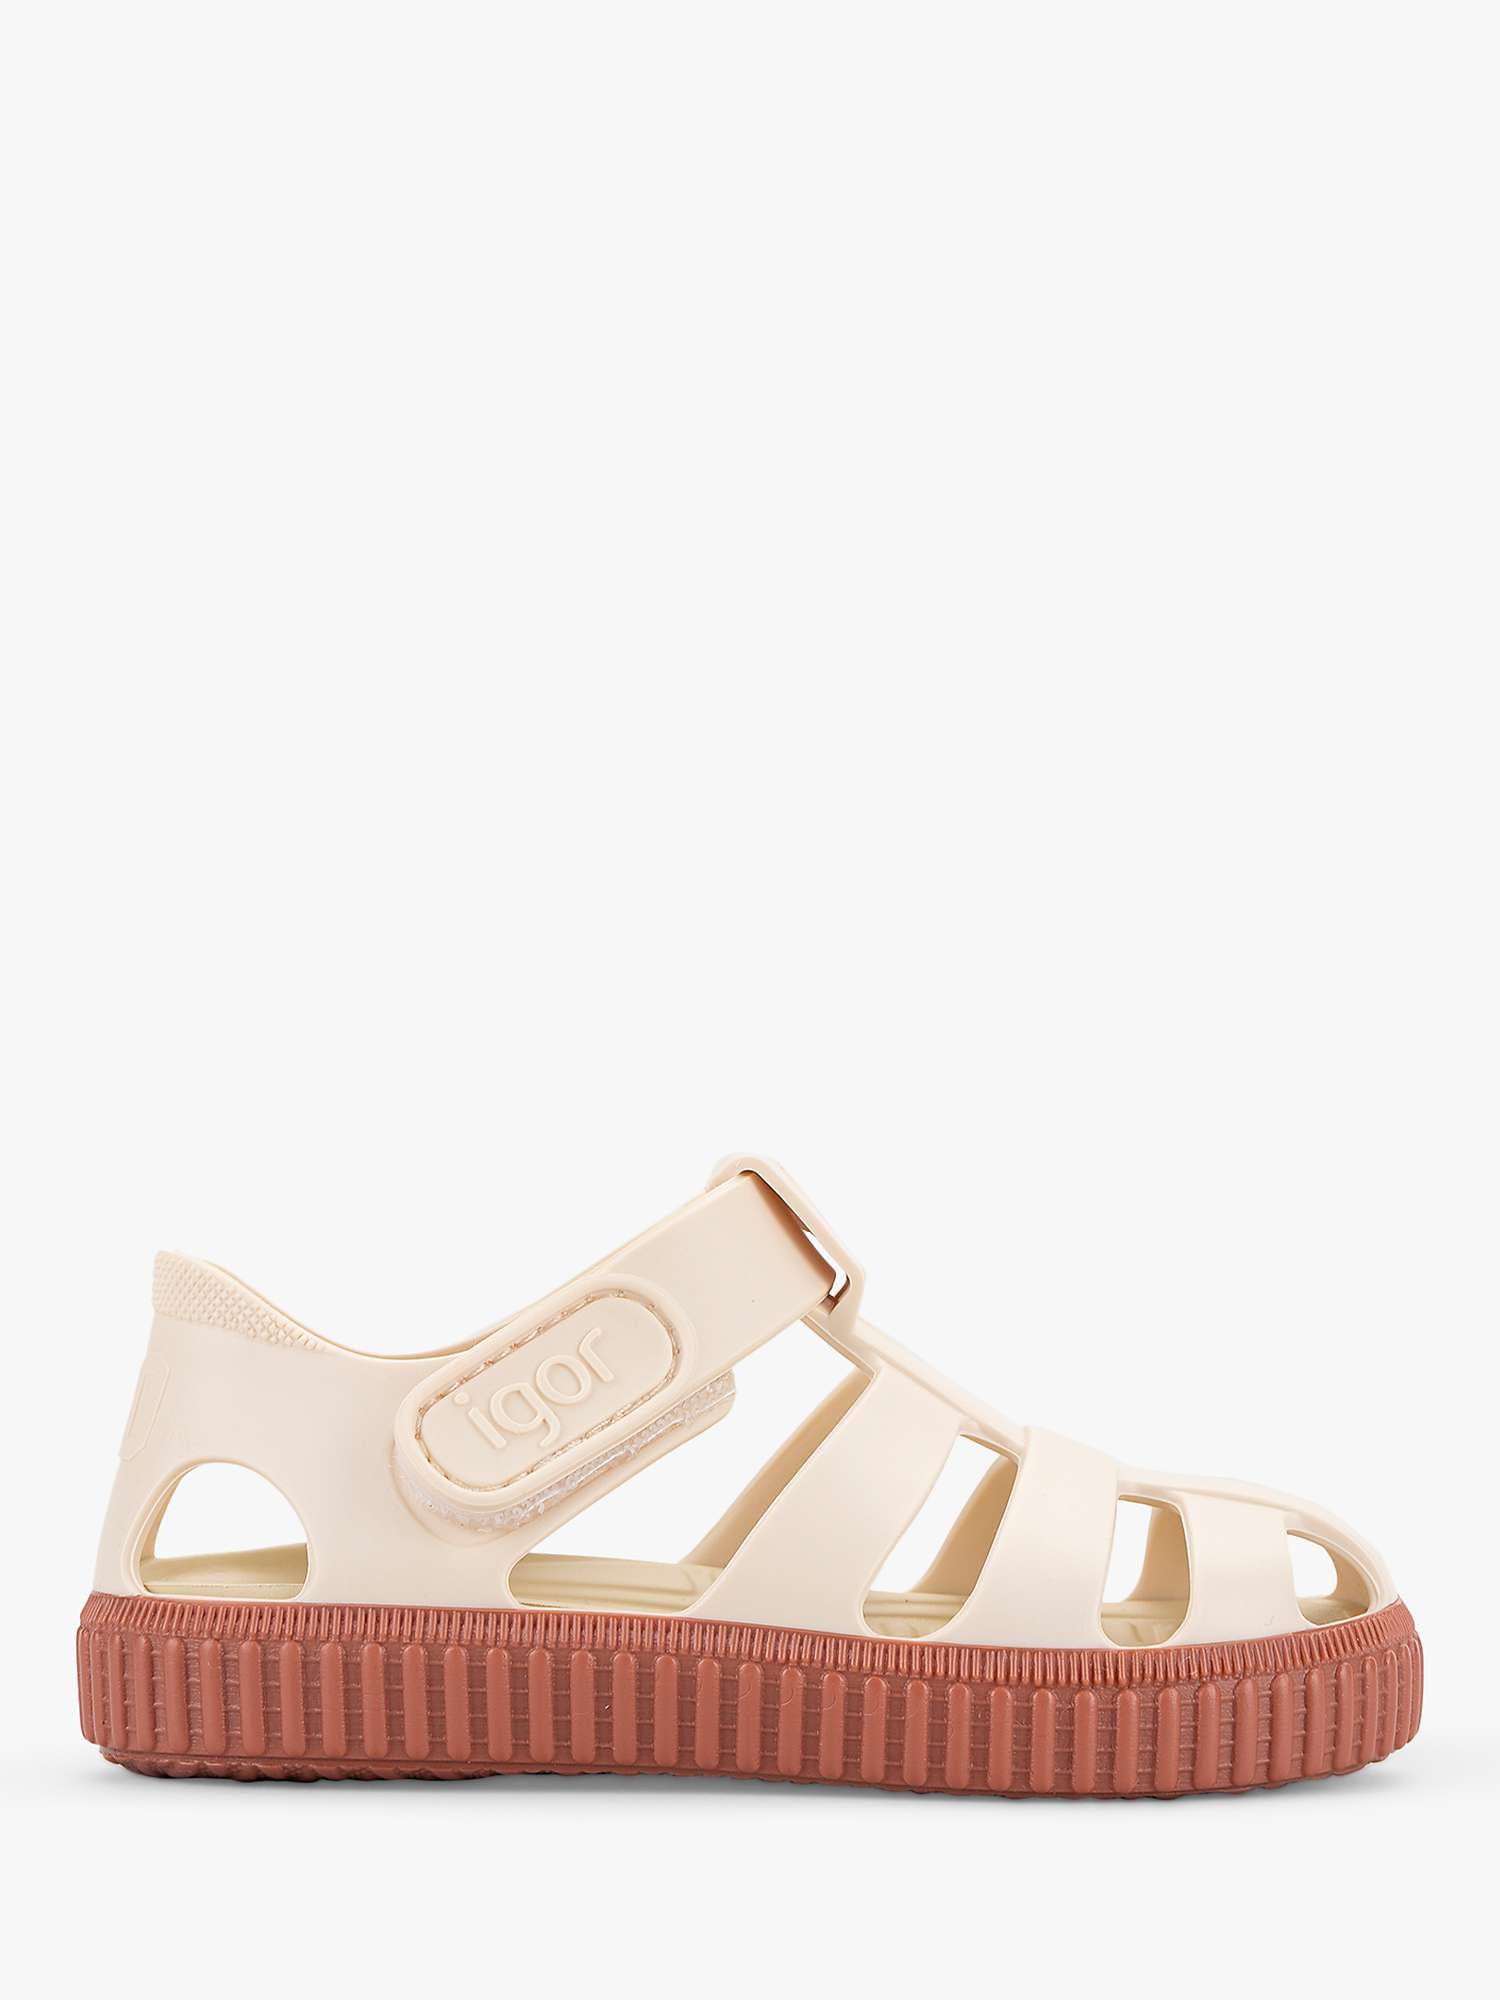 Buy IGOR Nico Marfil Jelly Sandals, Off White/Terracota Online at johnlewis.com